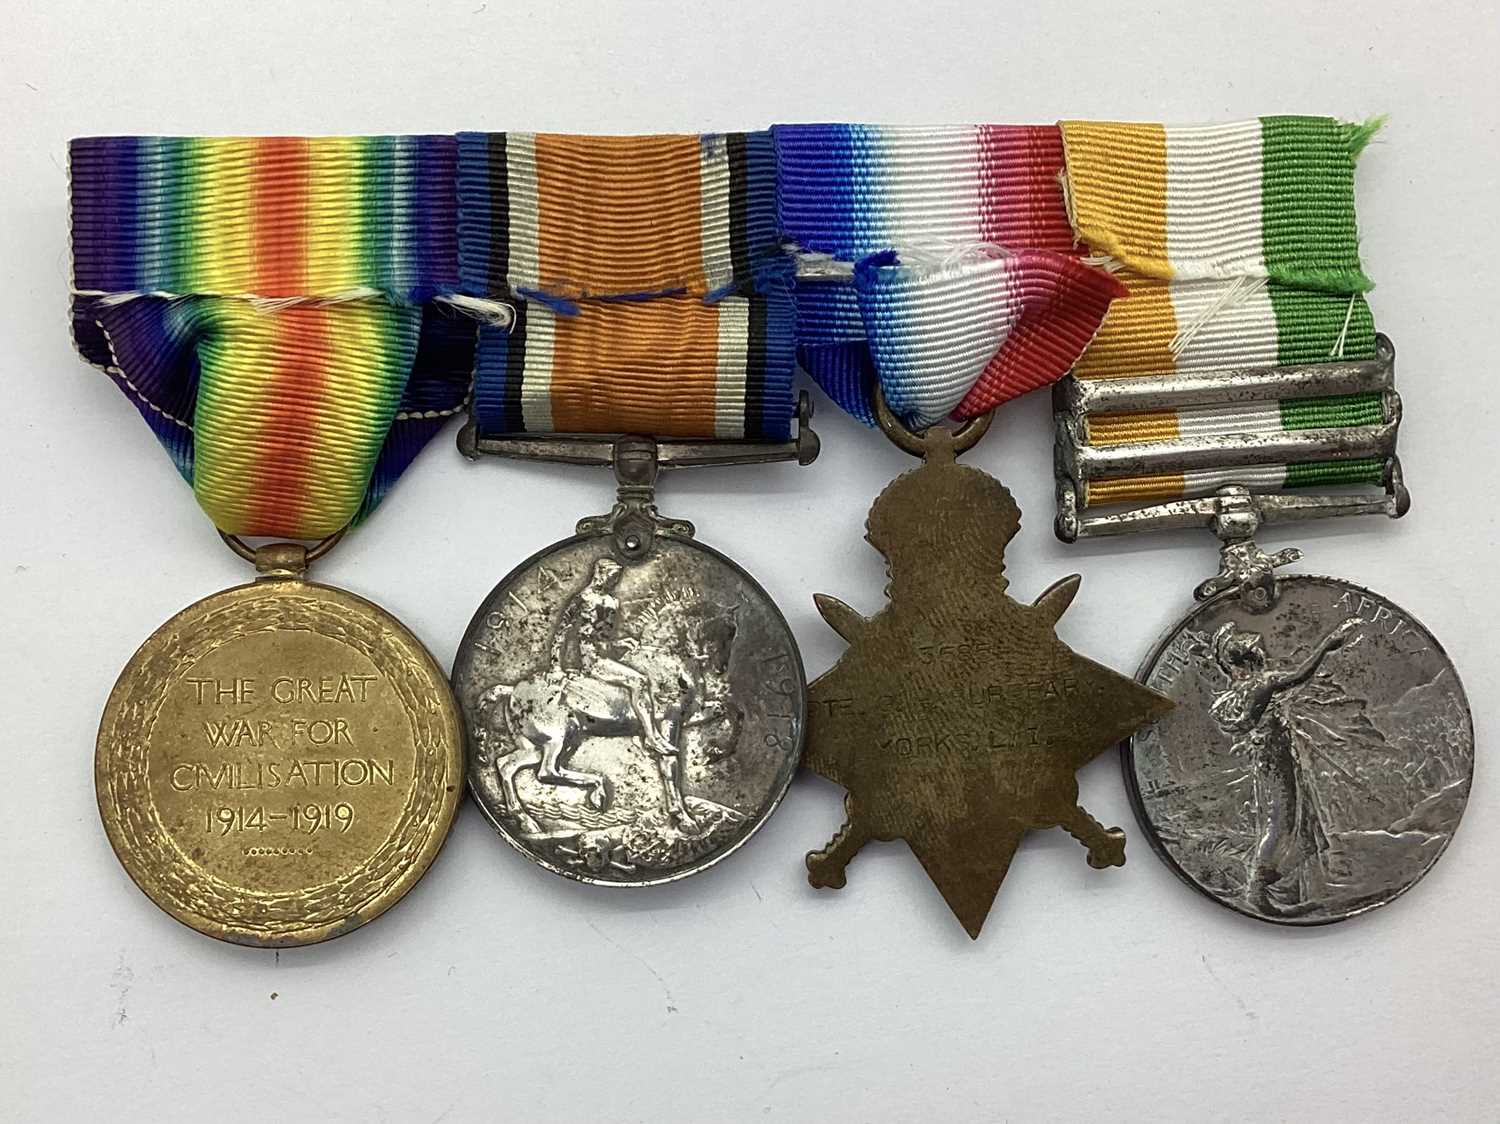 Edward VII Kings South Africa Medal, with two clasps South Africa 1901 and 1902, awarded to 6375 PTE - Image 3 of 4